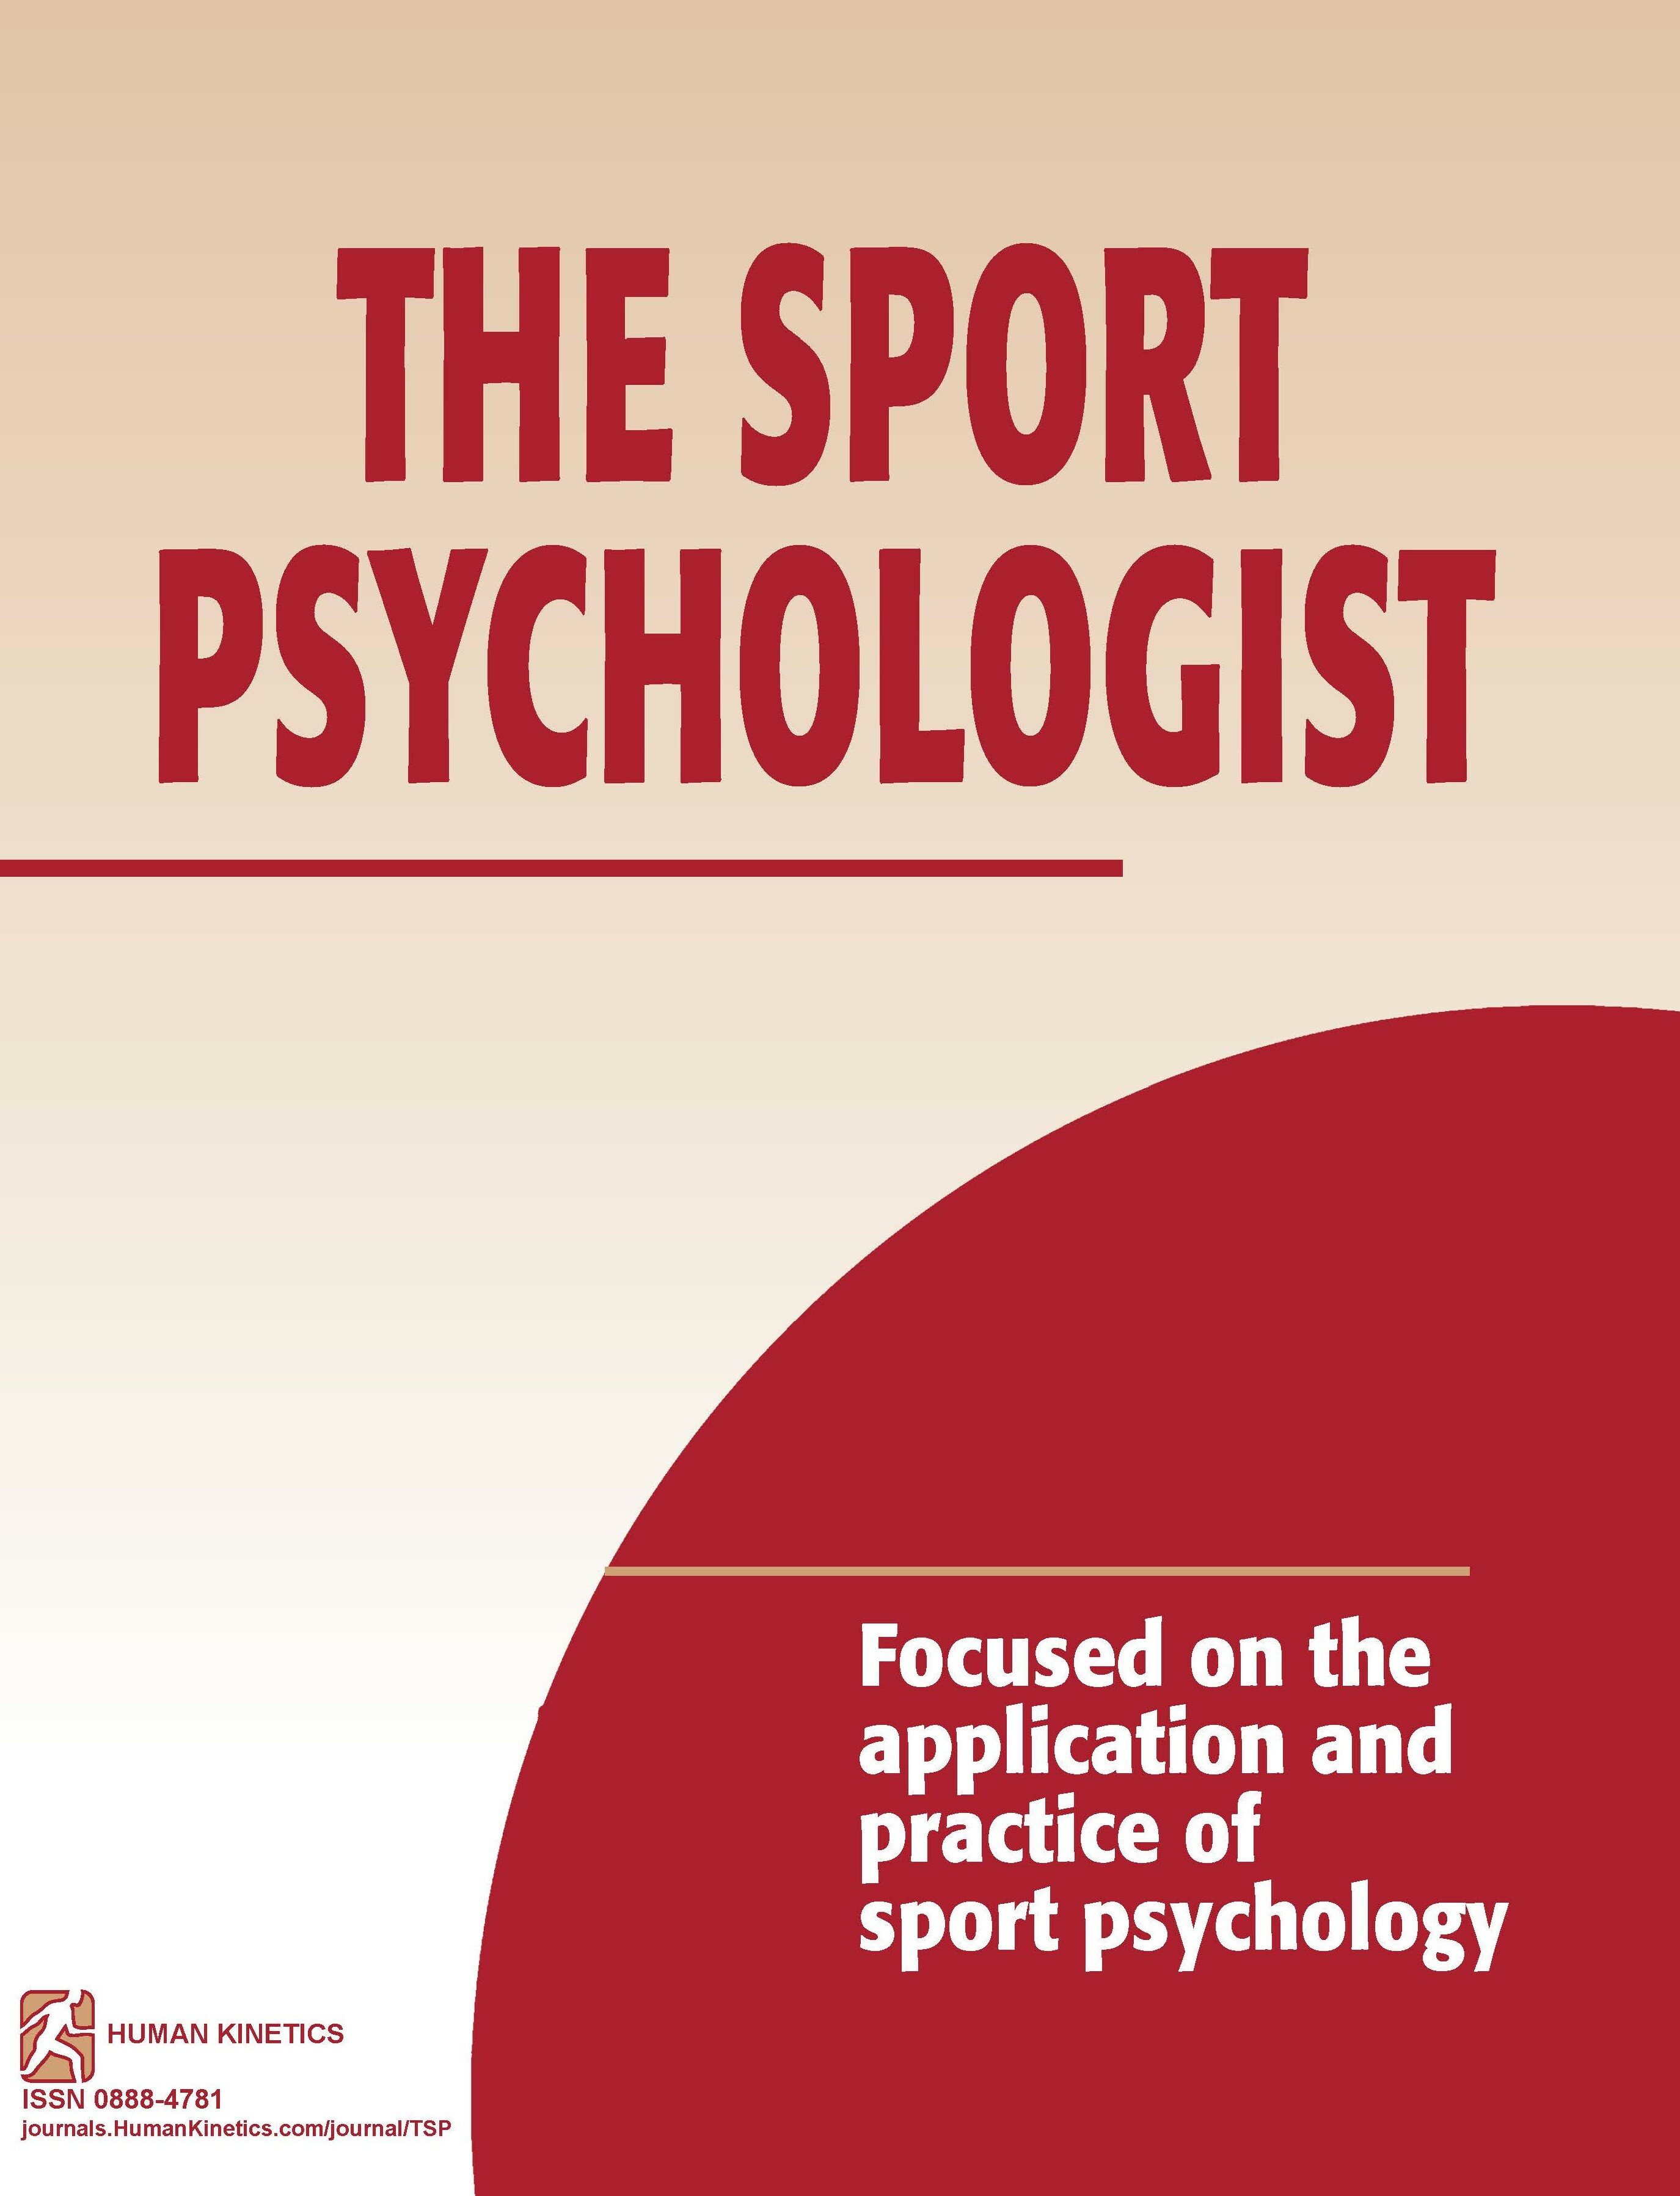 Exploring the Athletic Identity, Anxiety, and Mental Health of Division II Collegiate Athletes in the COVID-19 Era